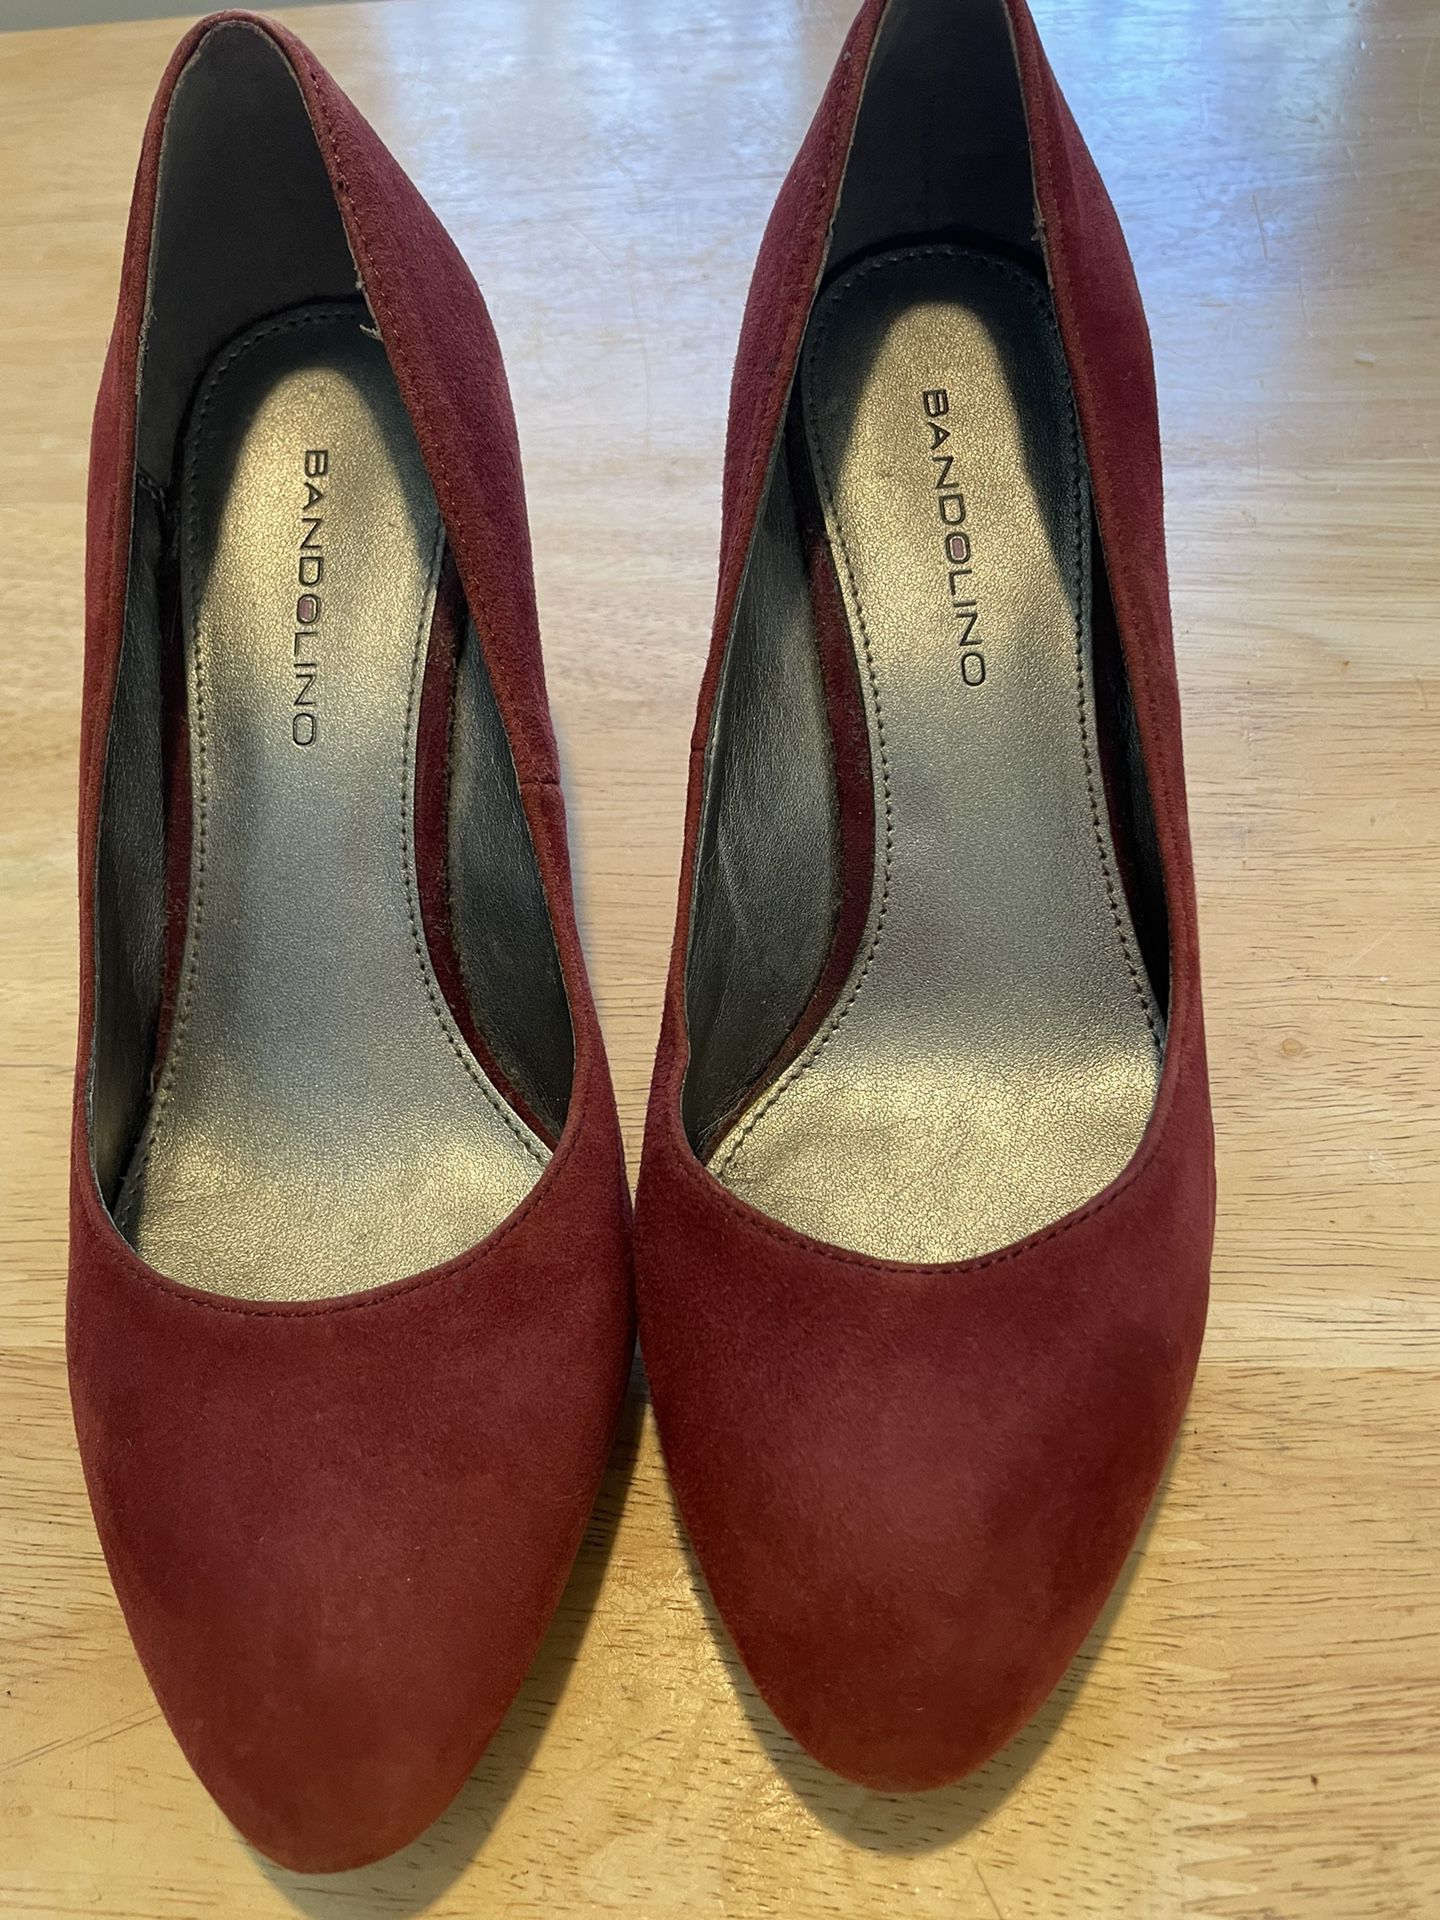 Suede Shoes Size 6, Like New